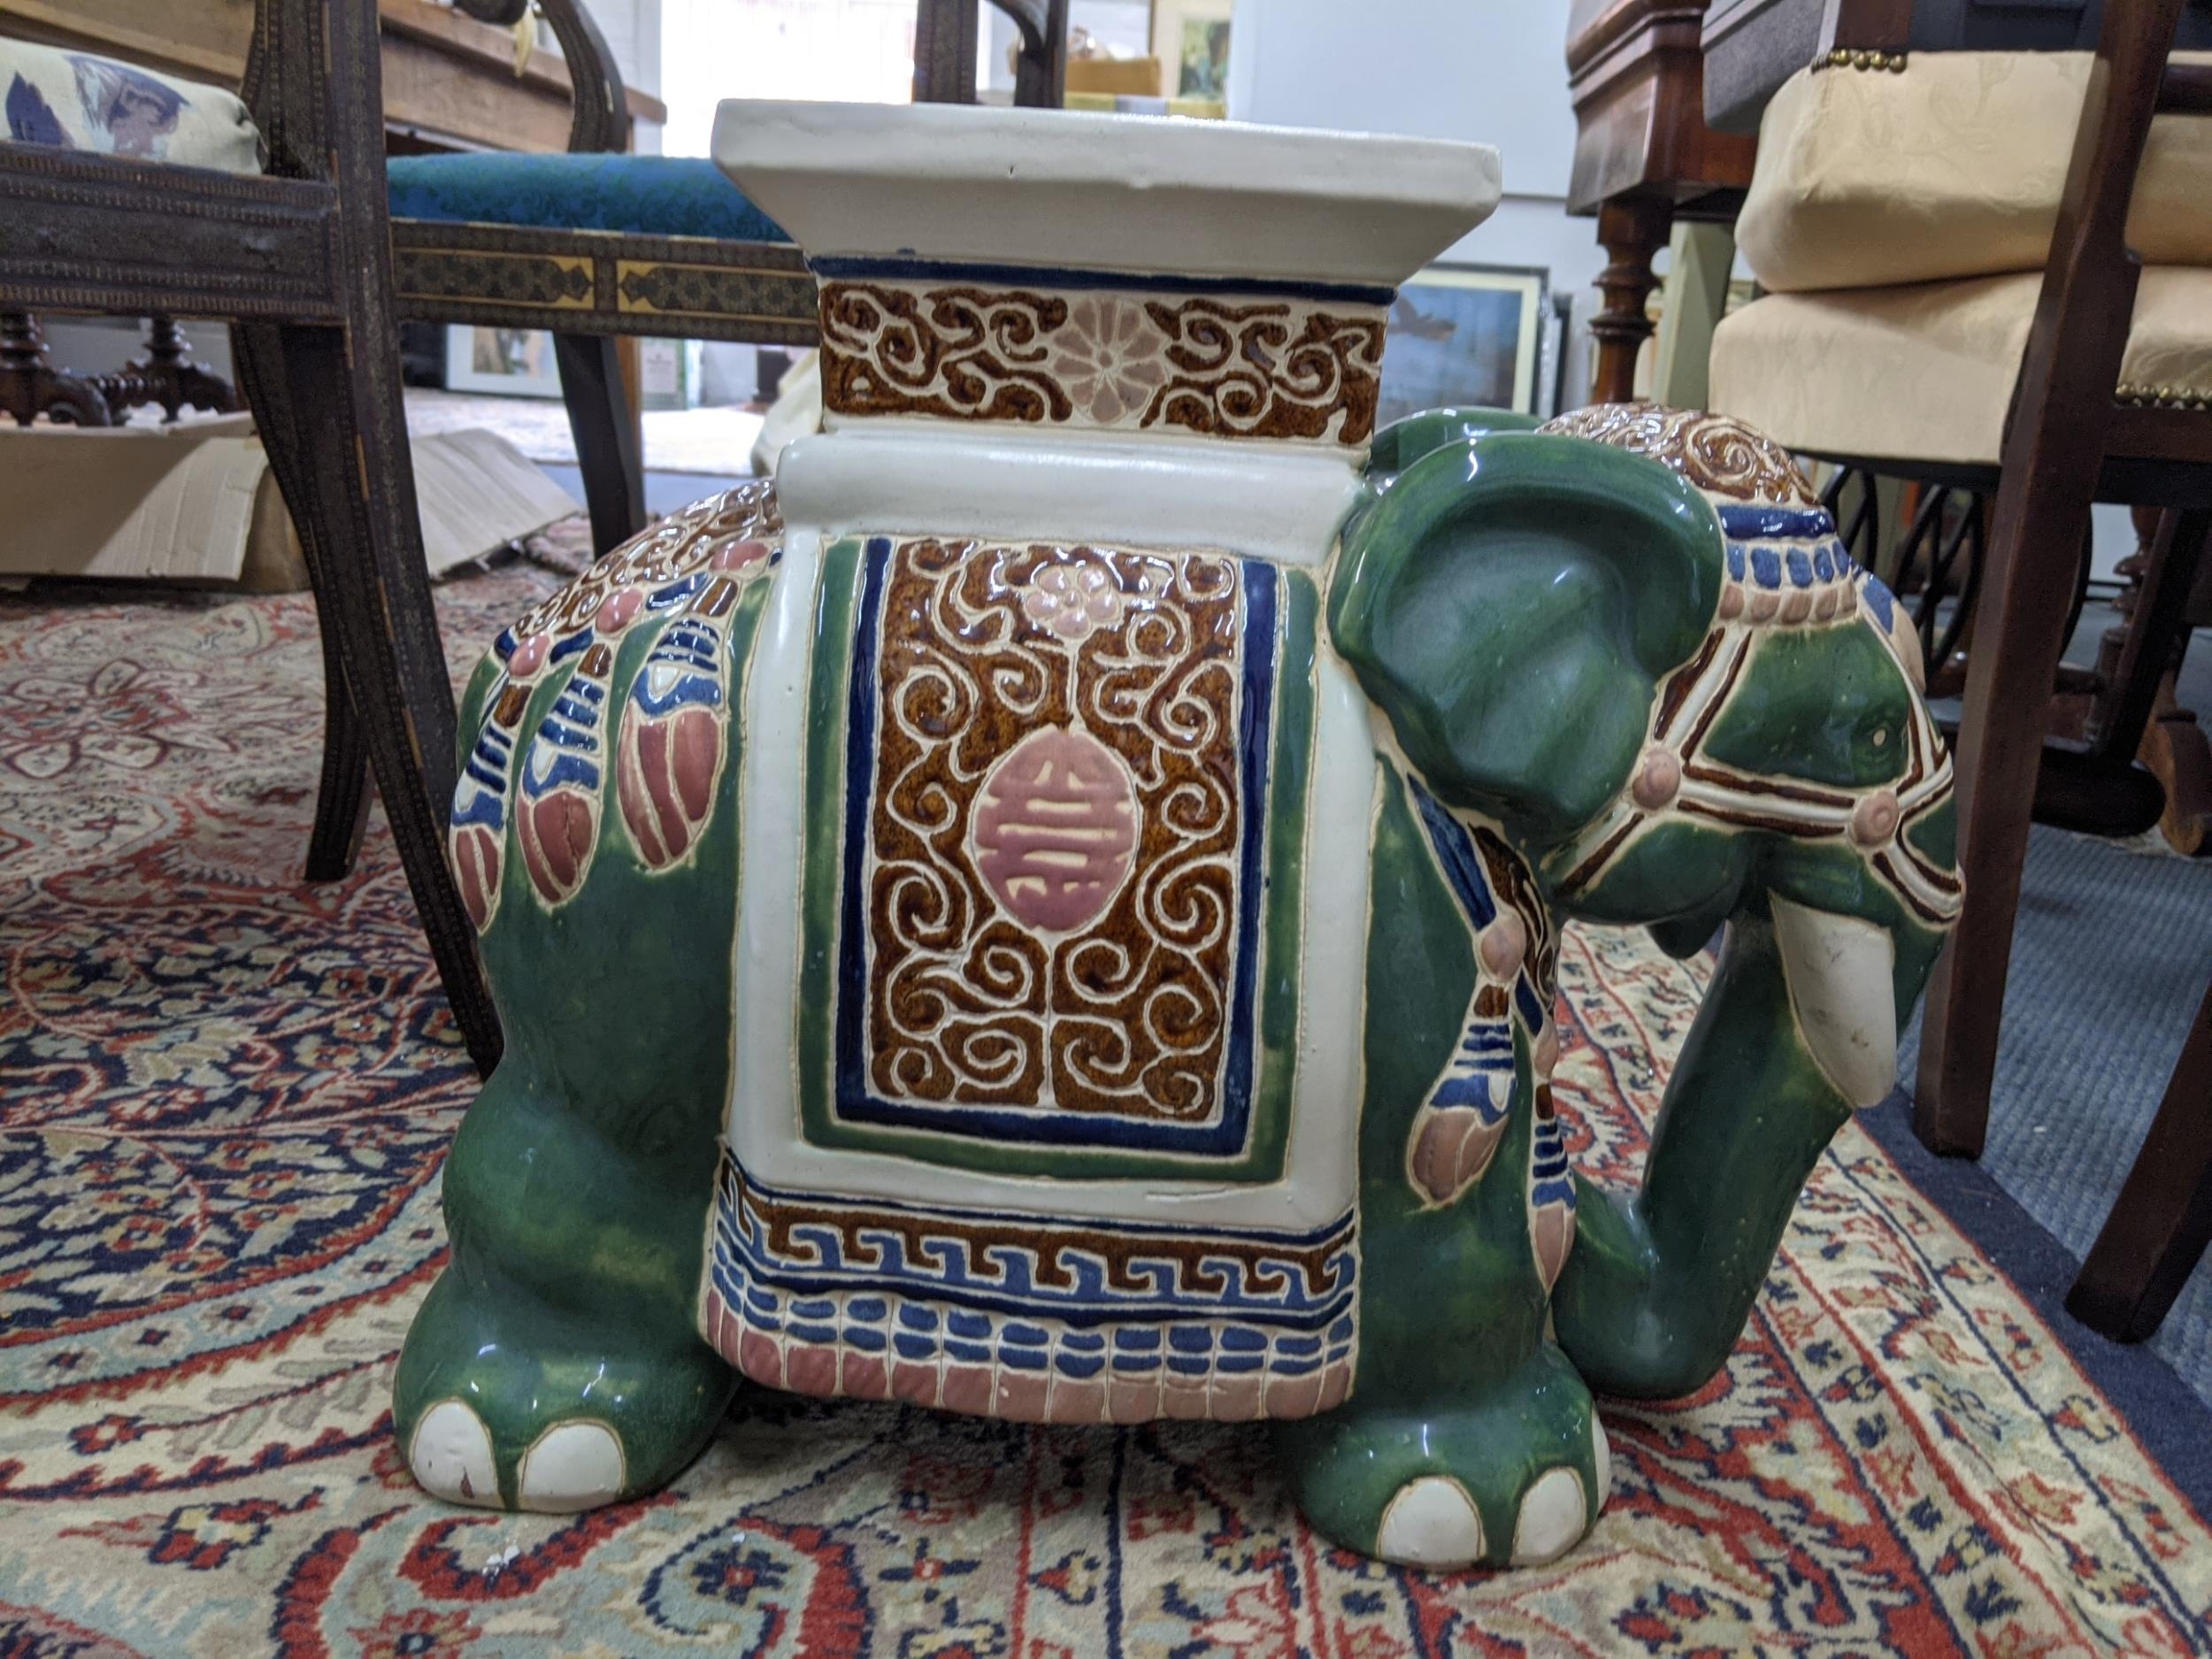 A 20th century conservatory stool fashioned as an elephant draped in Indian textiles and finery - Image 3 of 6